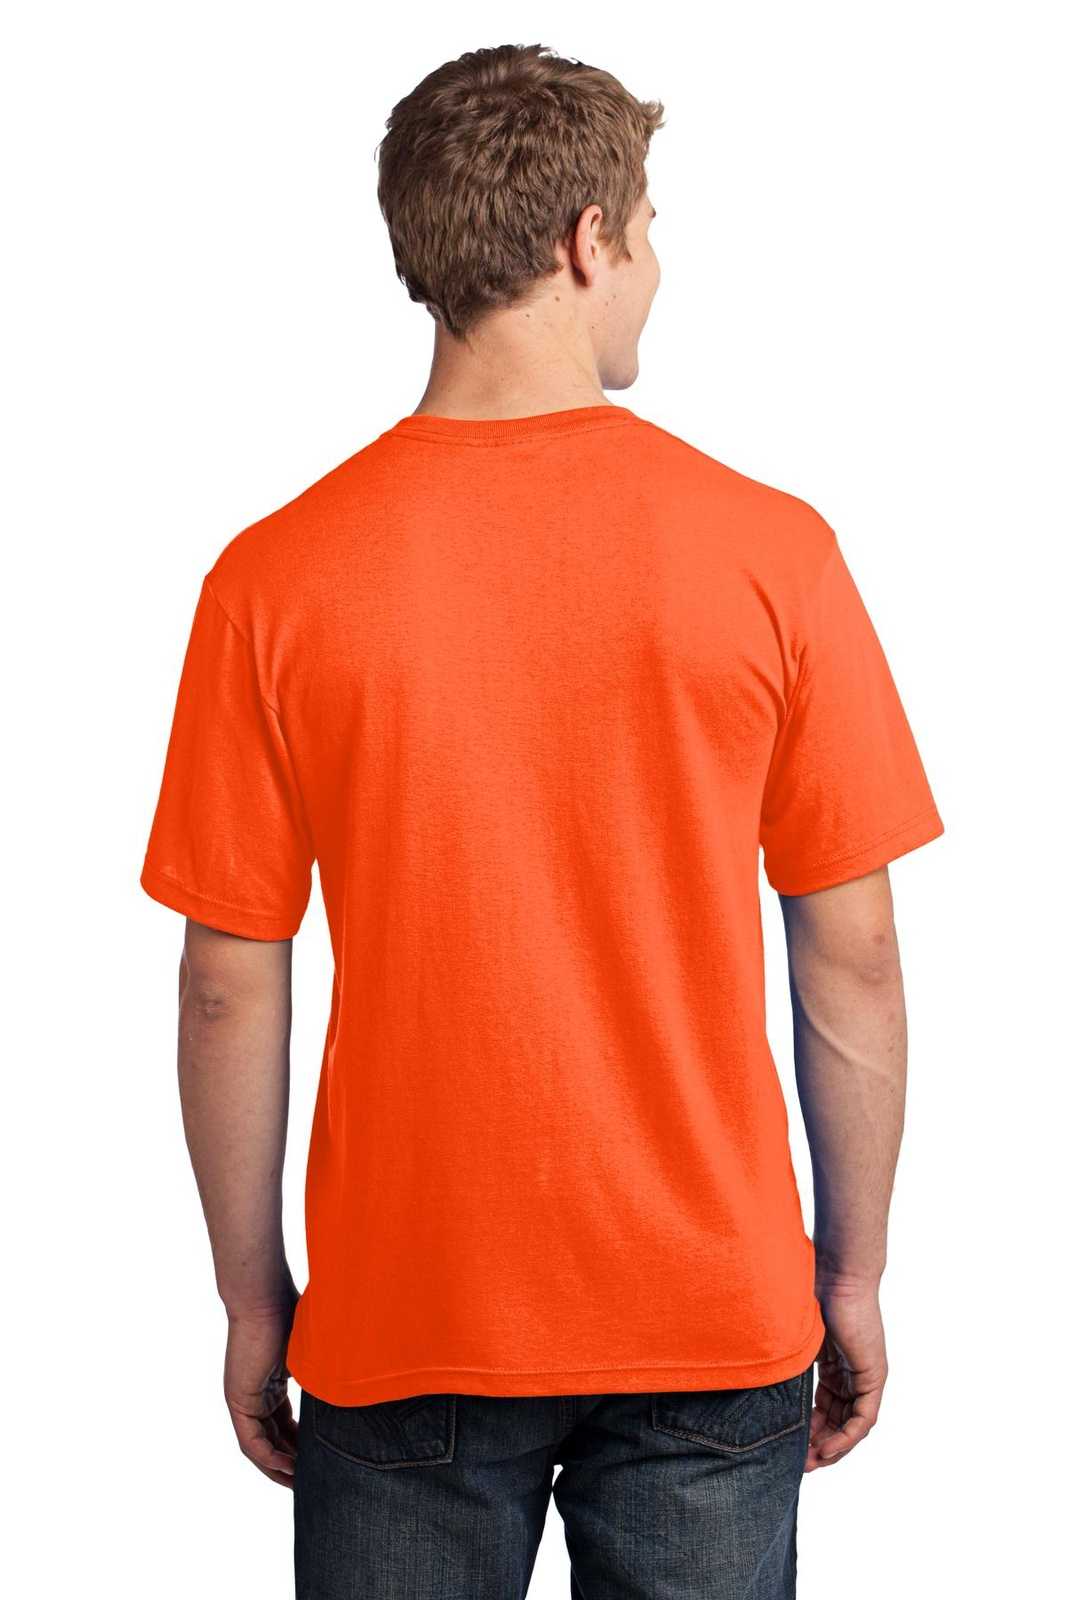 Port &amp; Company USA100P All-American Pocket Tee - Safety Orange - HIT a Double - 2